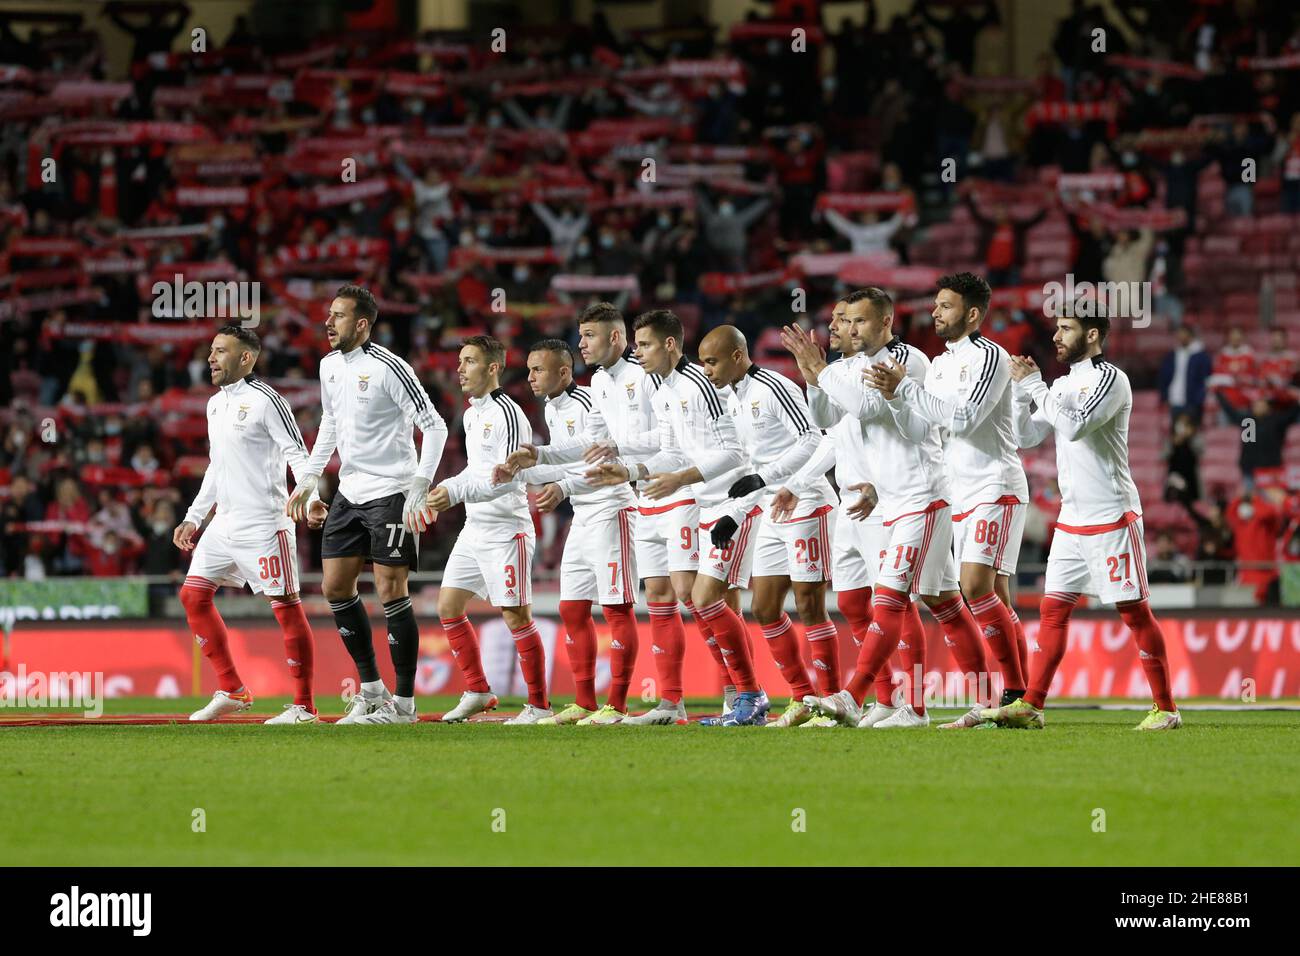 Lisboa, Portugal. 09th Jan, 2022. Players of SL Benfica line up before the start the Liga Portugal Bwin match between SL Benfica vs FC Paços de Ferreira at Estádio da Luz on 09 January, 2022 in Lisbon, Portugal. Valter Gouveia/SPP Credit: SPP Sport Press Photo. /Alamy Live News Stock Photo